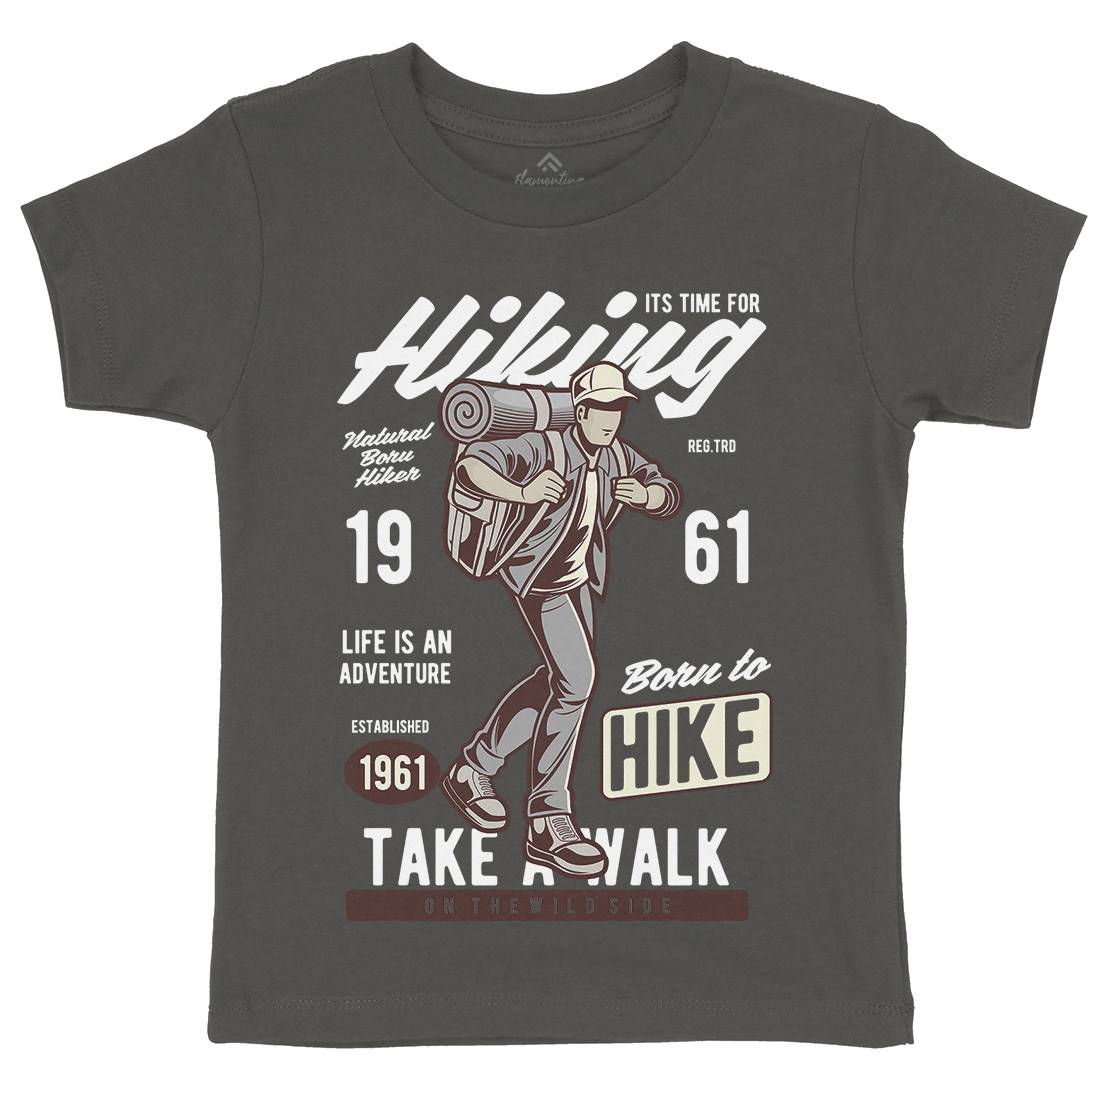 Its Time For Hiking Kids Crew Neck T-Shirt Nature C382